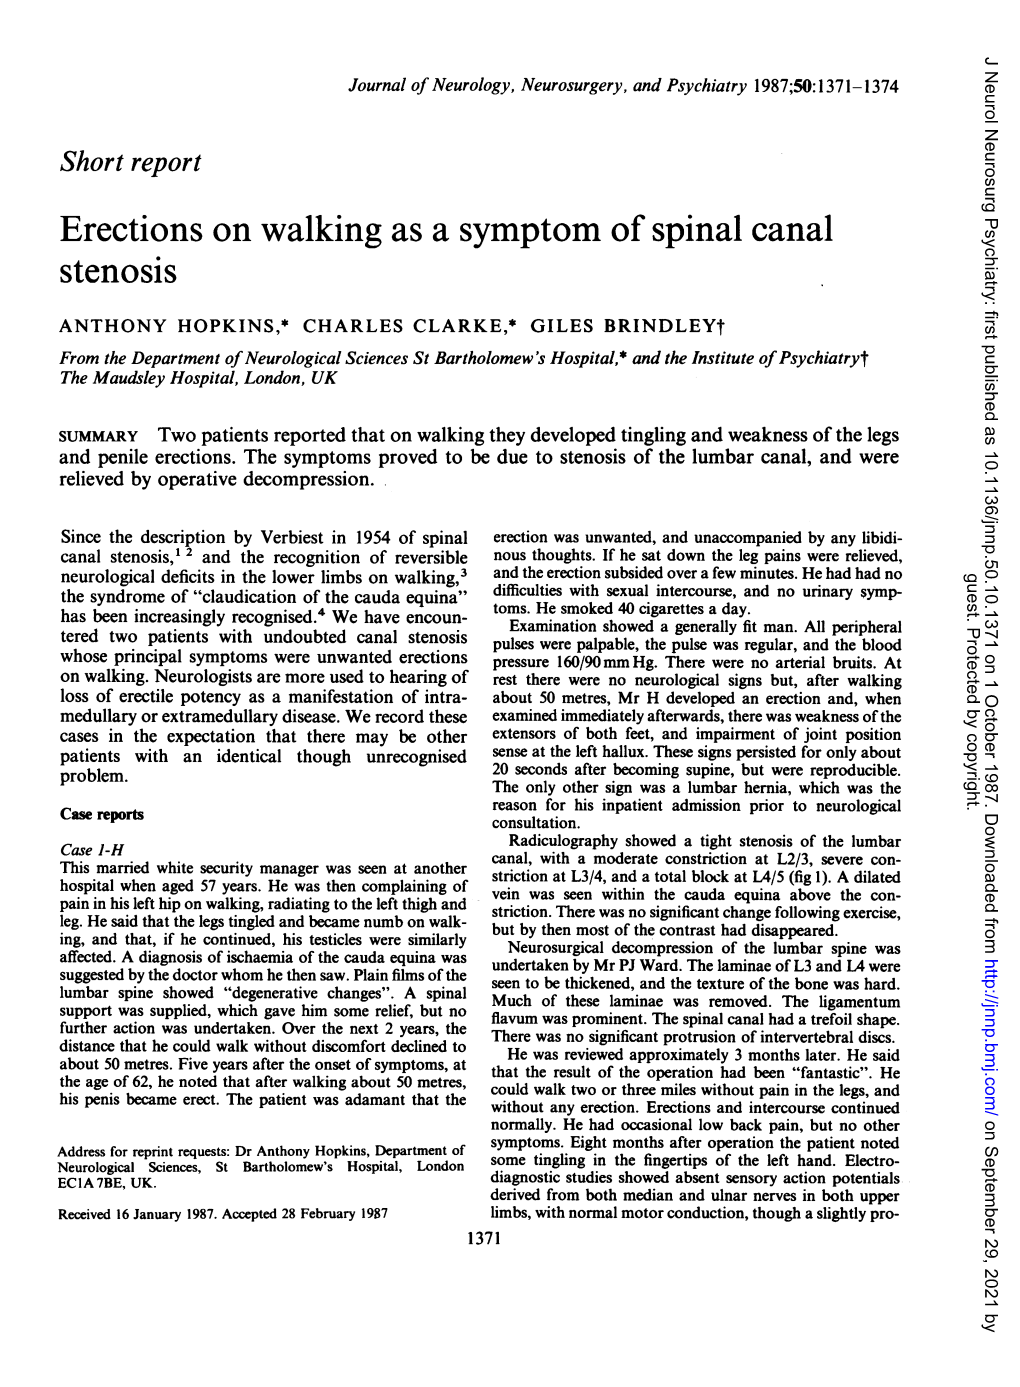 Erections on Walking As a Symptom Ofspinal Canal Stenosis